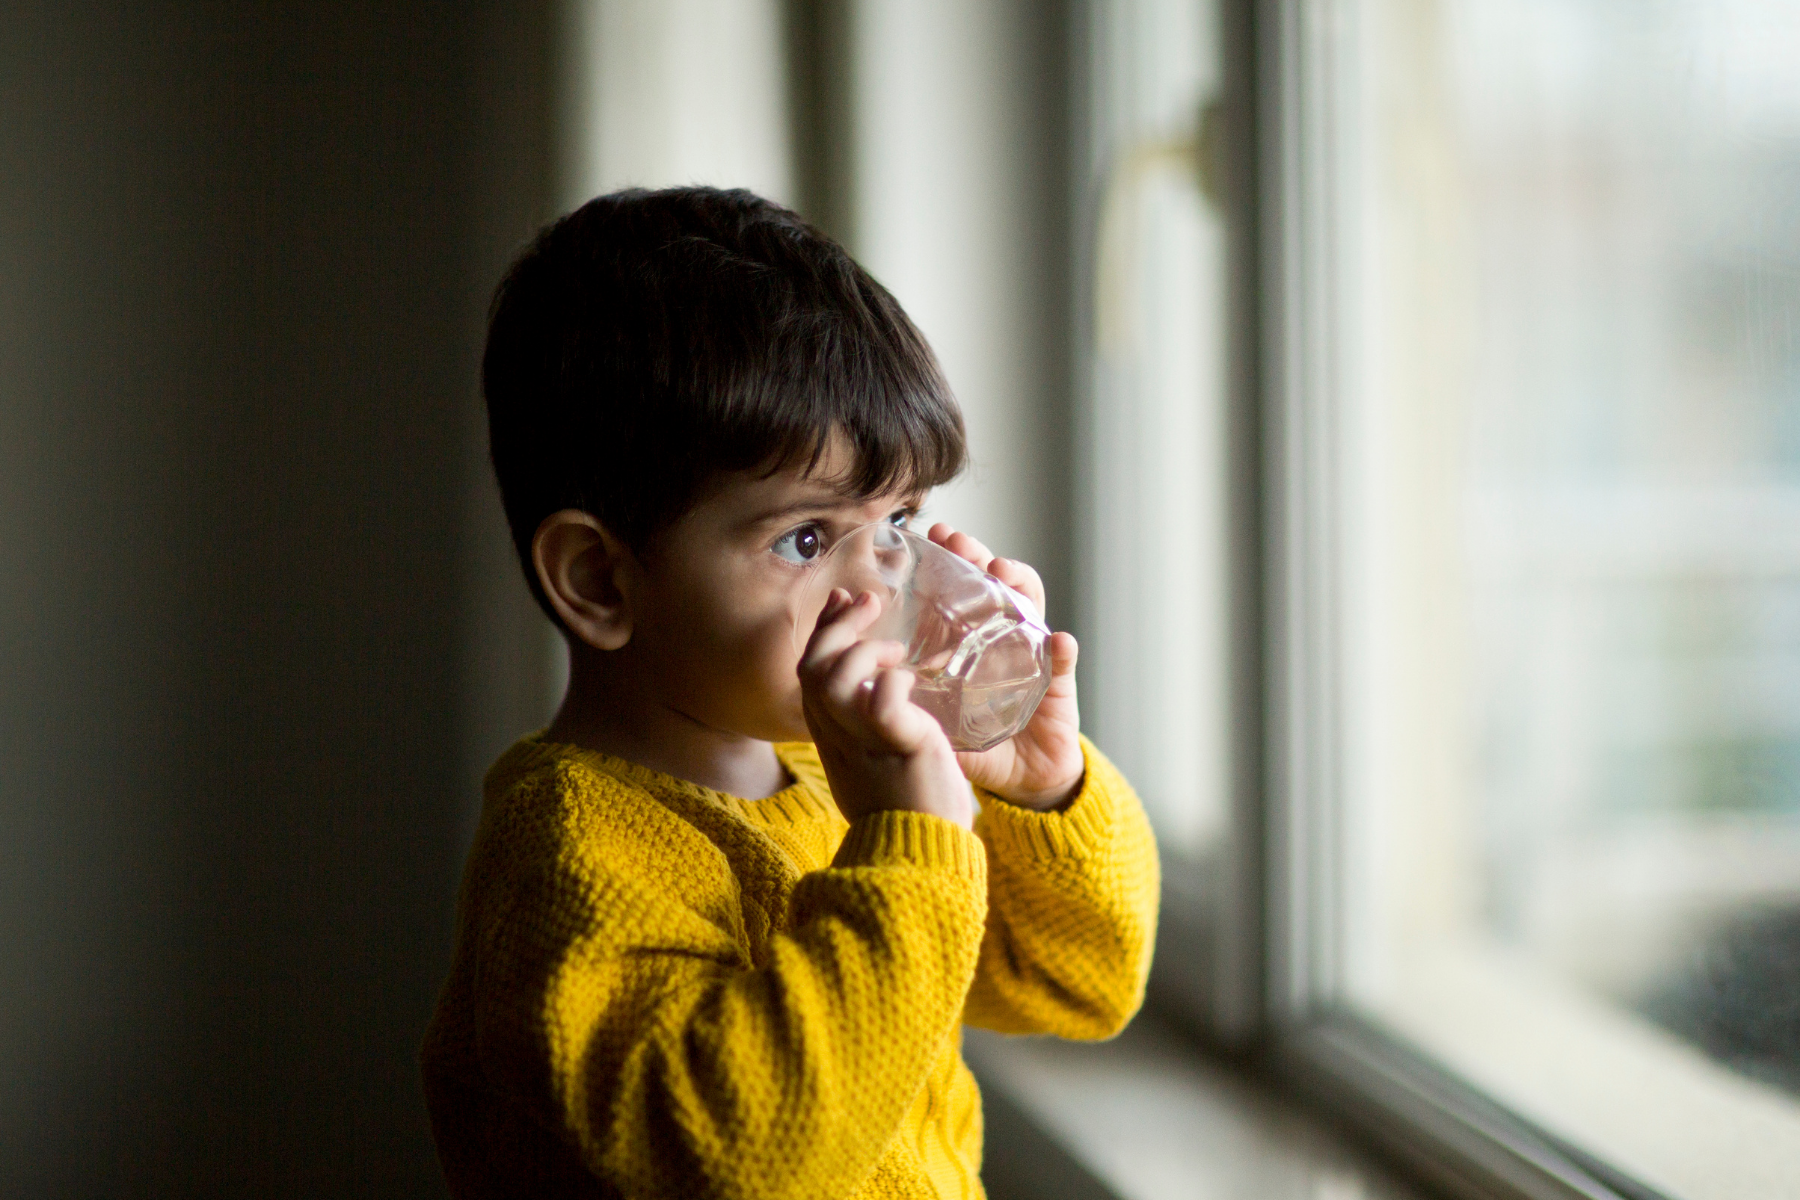 Child looking out of a window, drinking water from a glass.